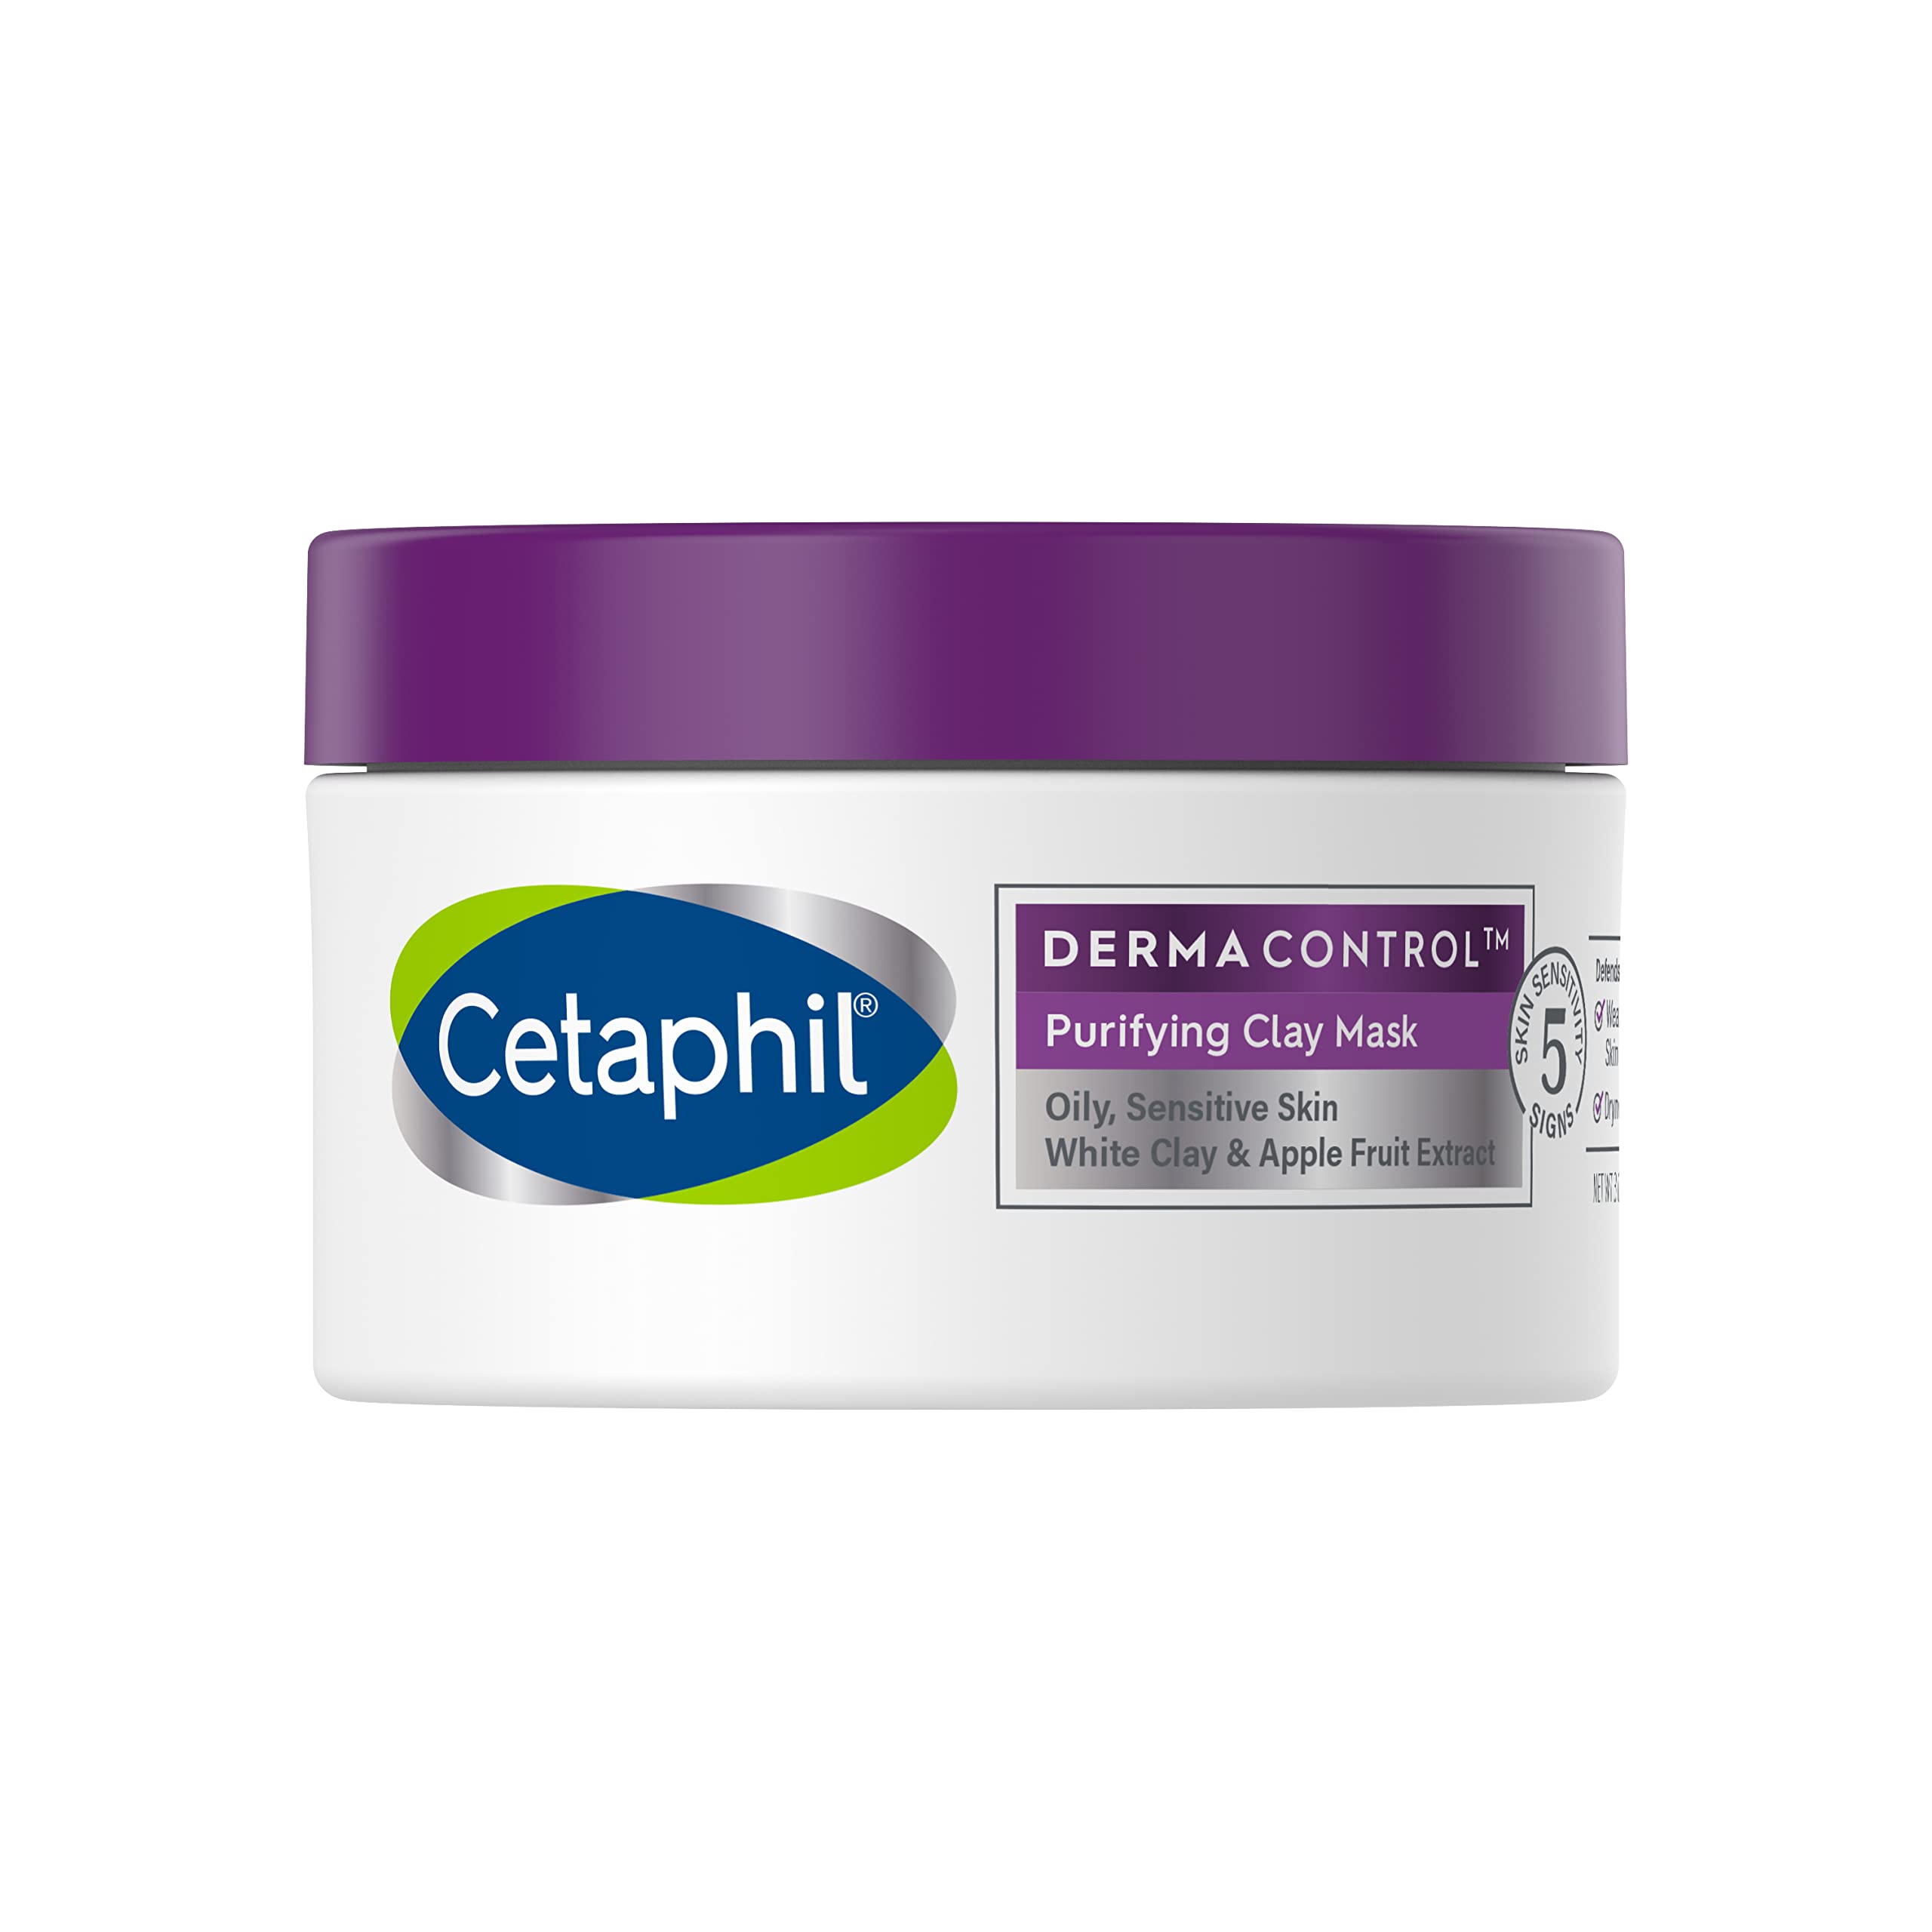 Cetaphil Derma Control Purifying Clay Mask